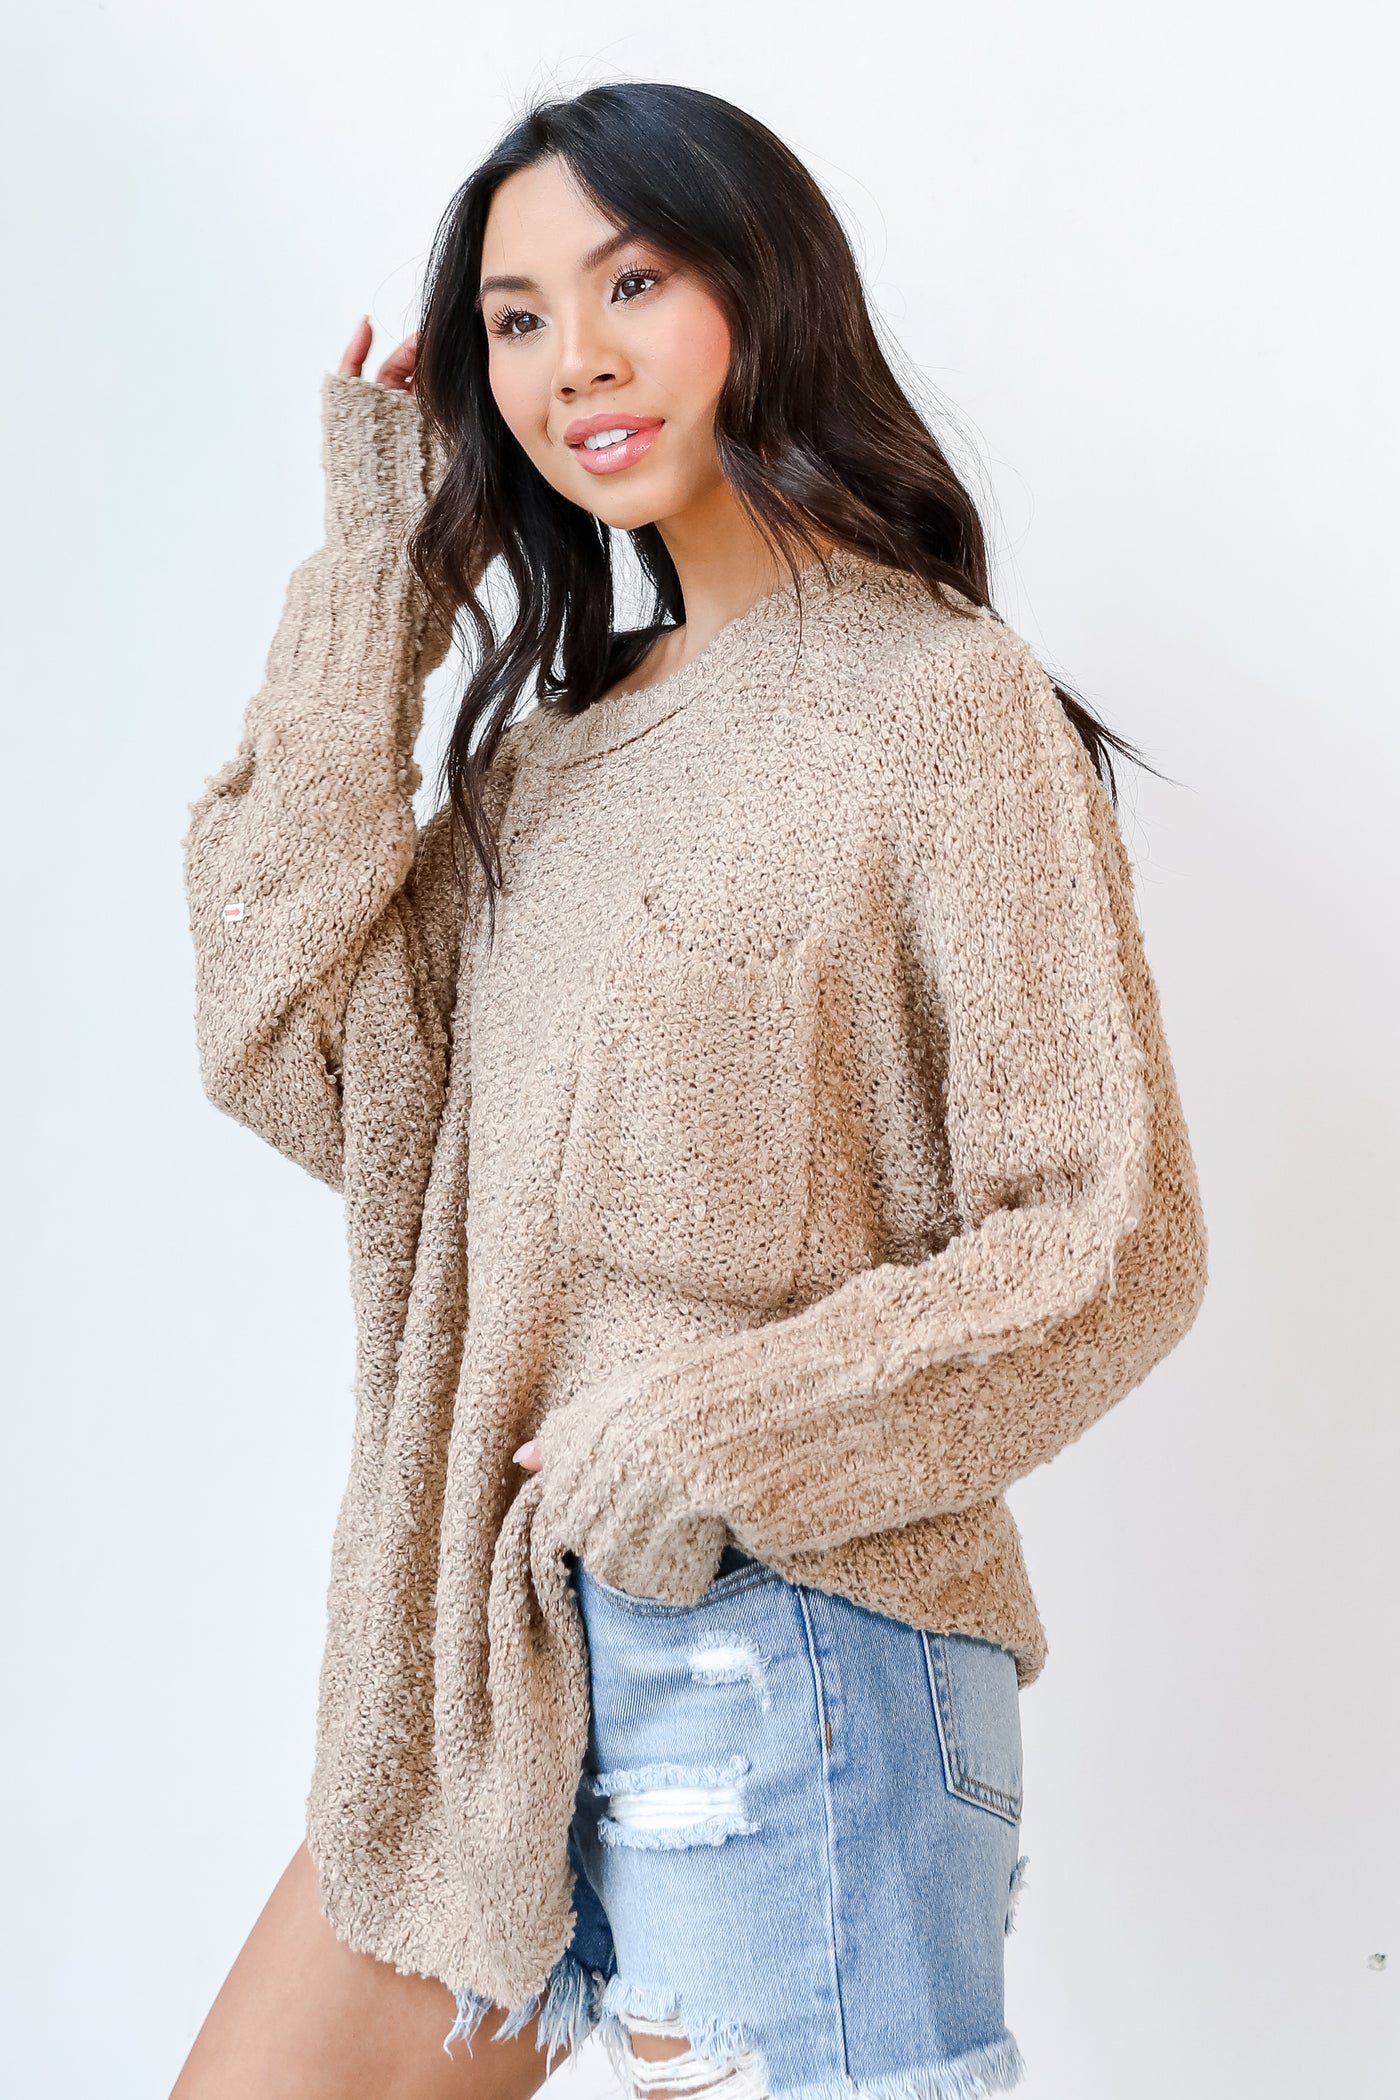 Sweater in taupe side view